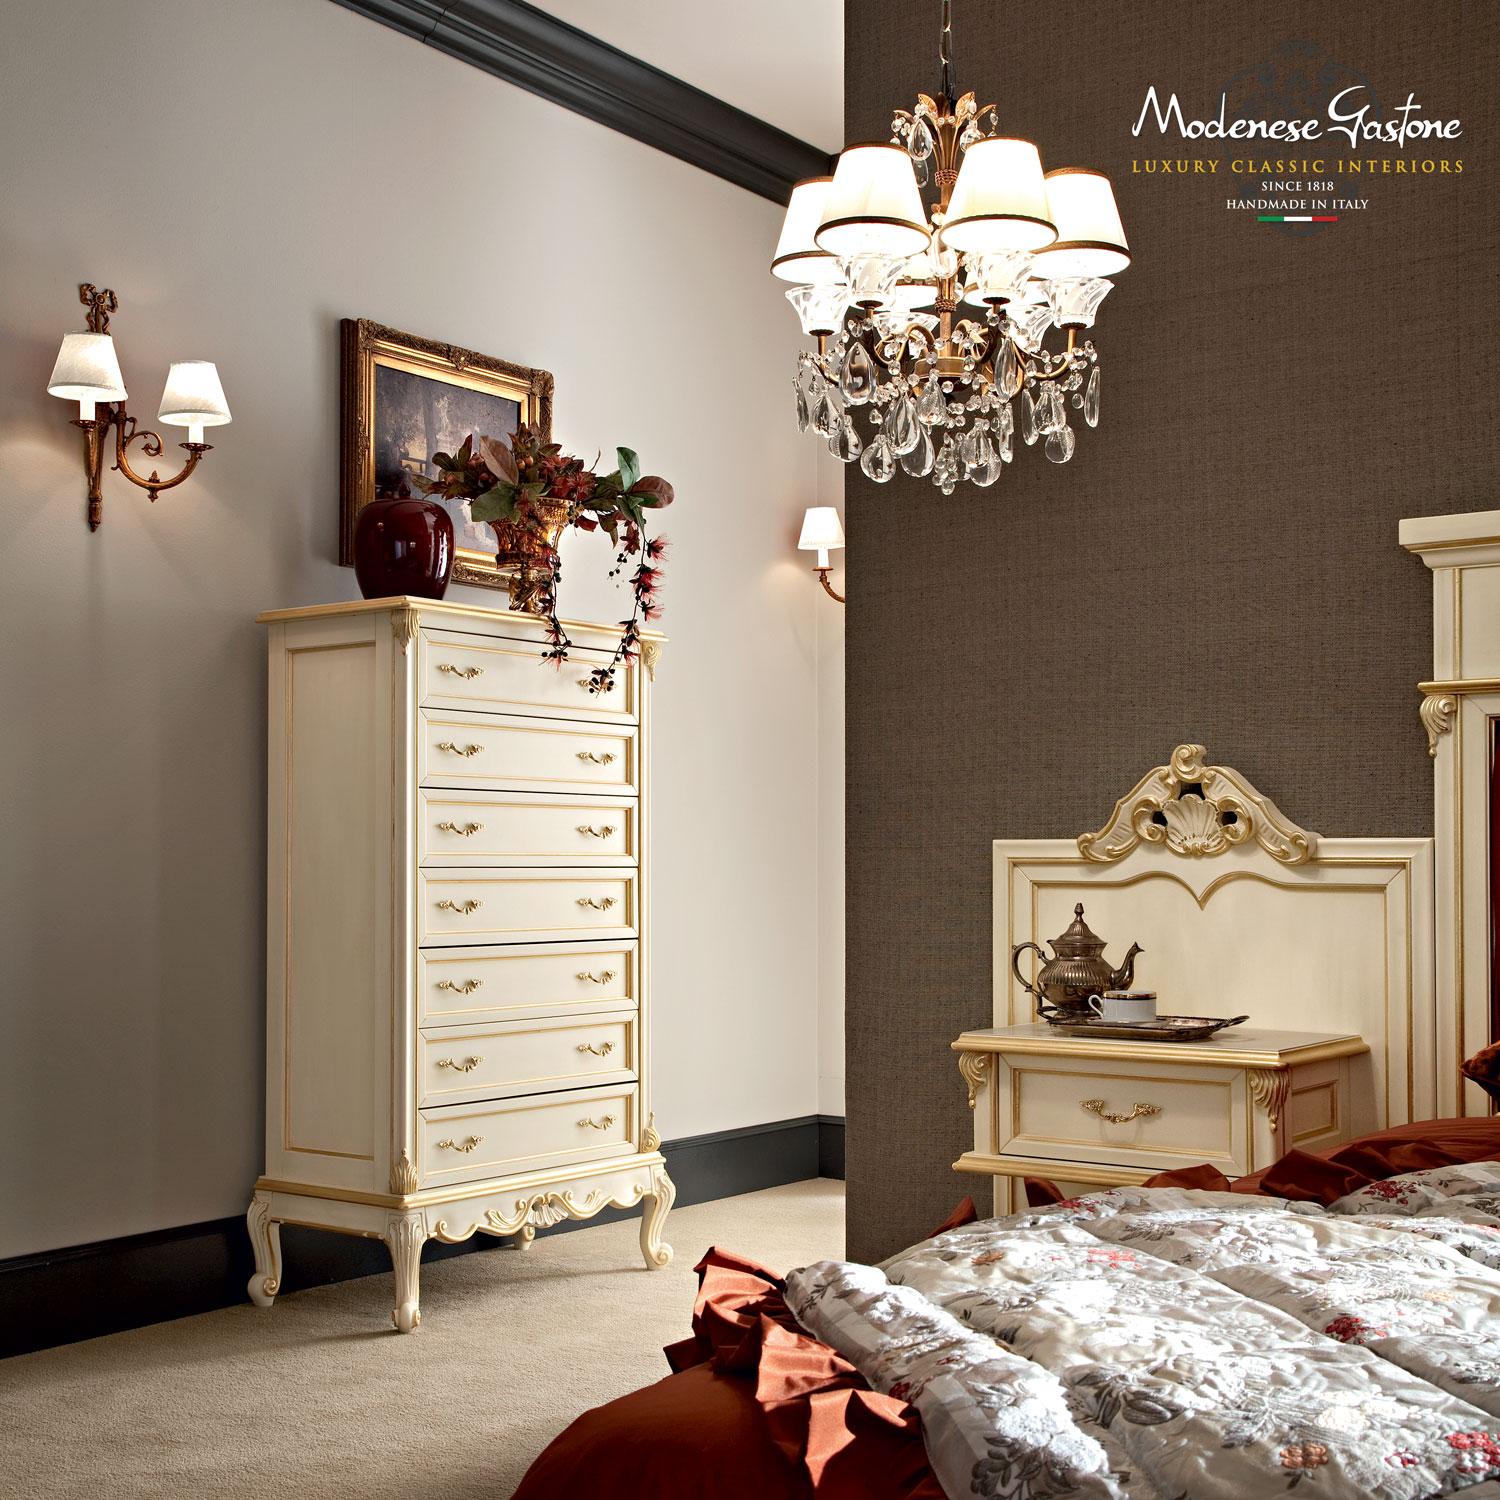 Clearly bespoke 7-drawers chest of drawers by Modenese Gastone Luxury Interiors, premium decorations include appealing radica wooden surfaces and silver leaf decorations on edges, baroque carvings and scrolled legs. Each drawer features a Blumotion